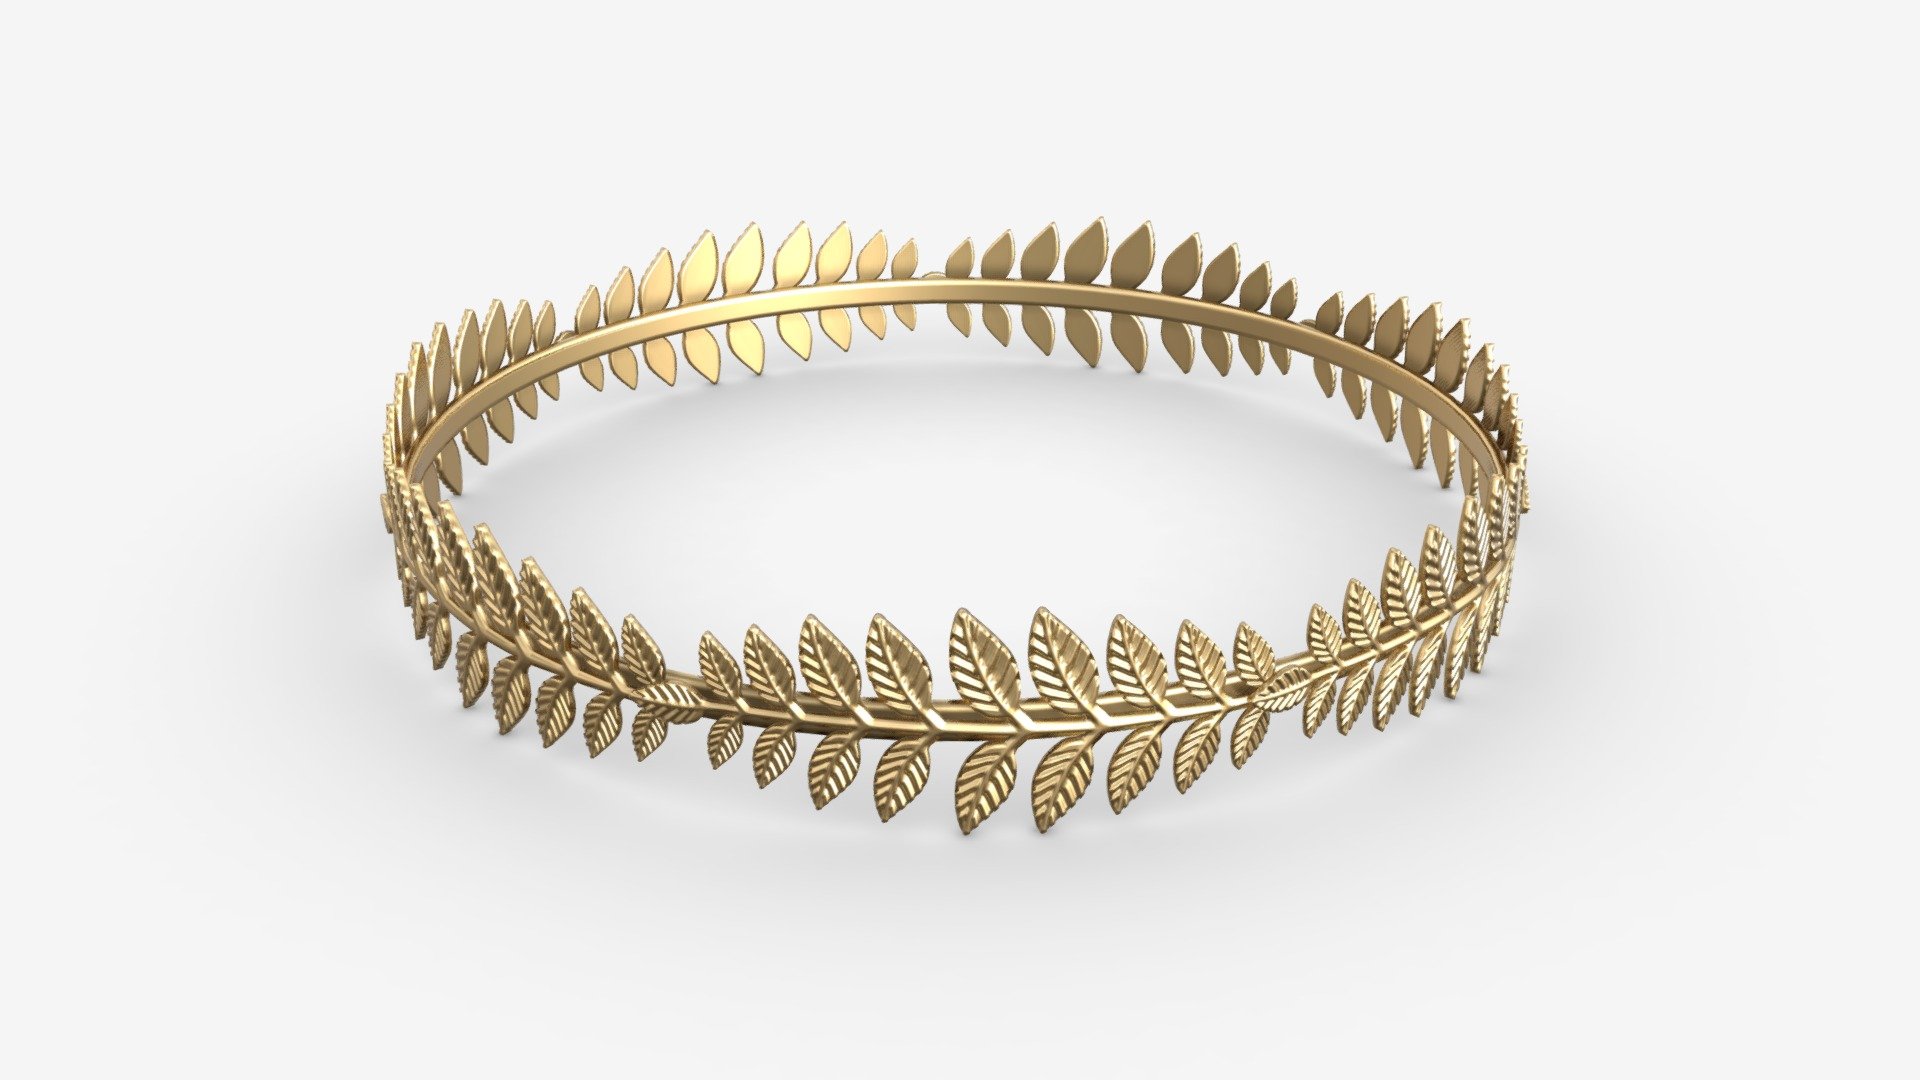 Olive Branch Headband Gold Crown - Buy Royalty Free 3D model by HQ3DMOD (@AivisAstics) 3d model